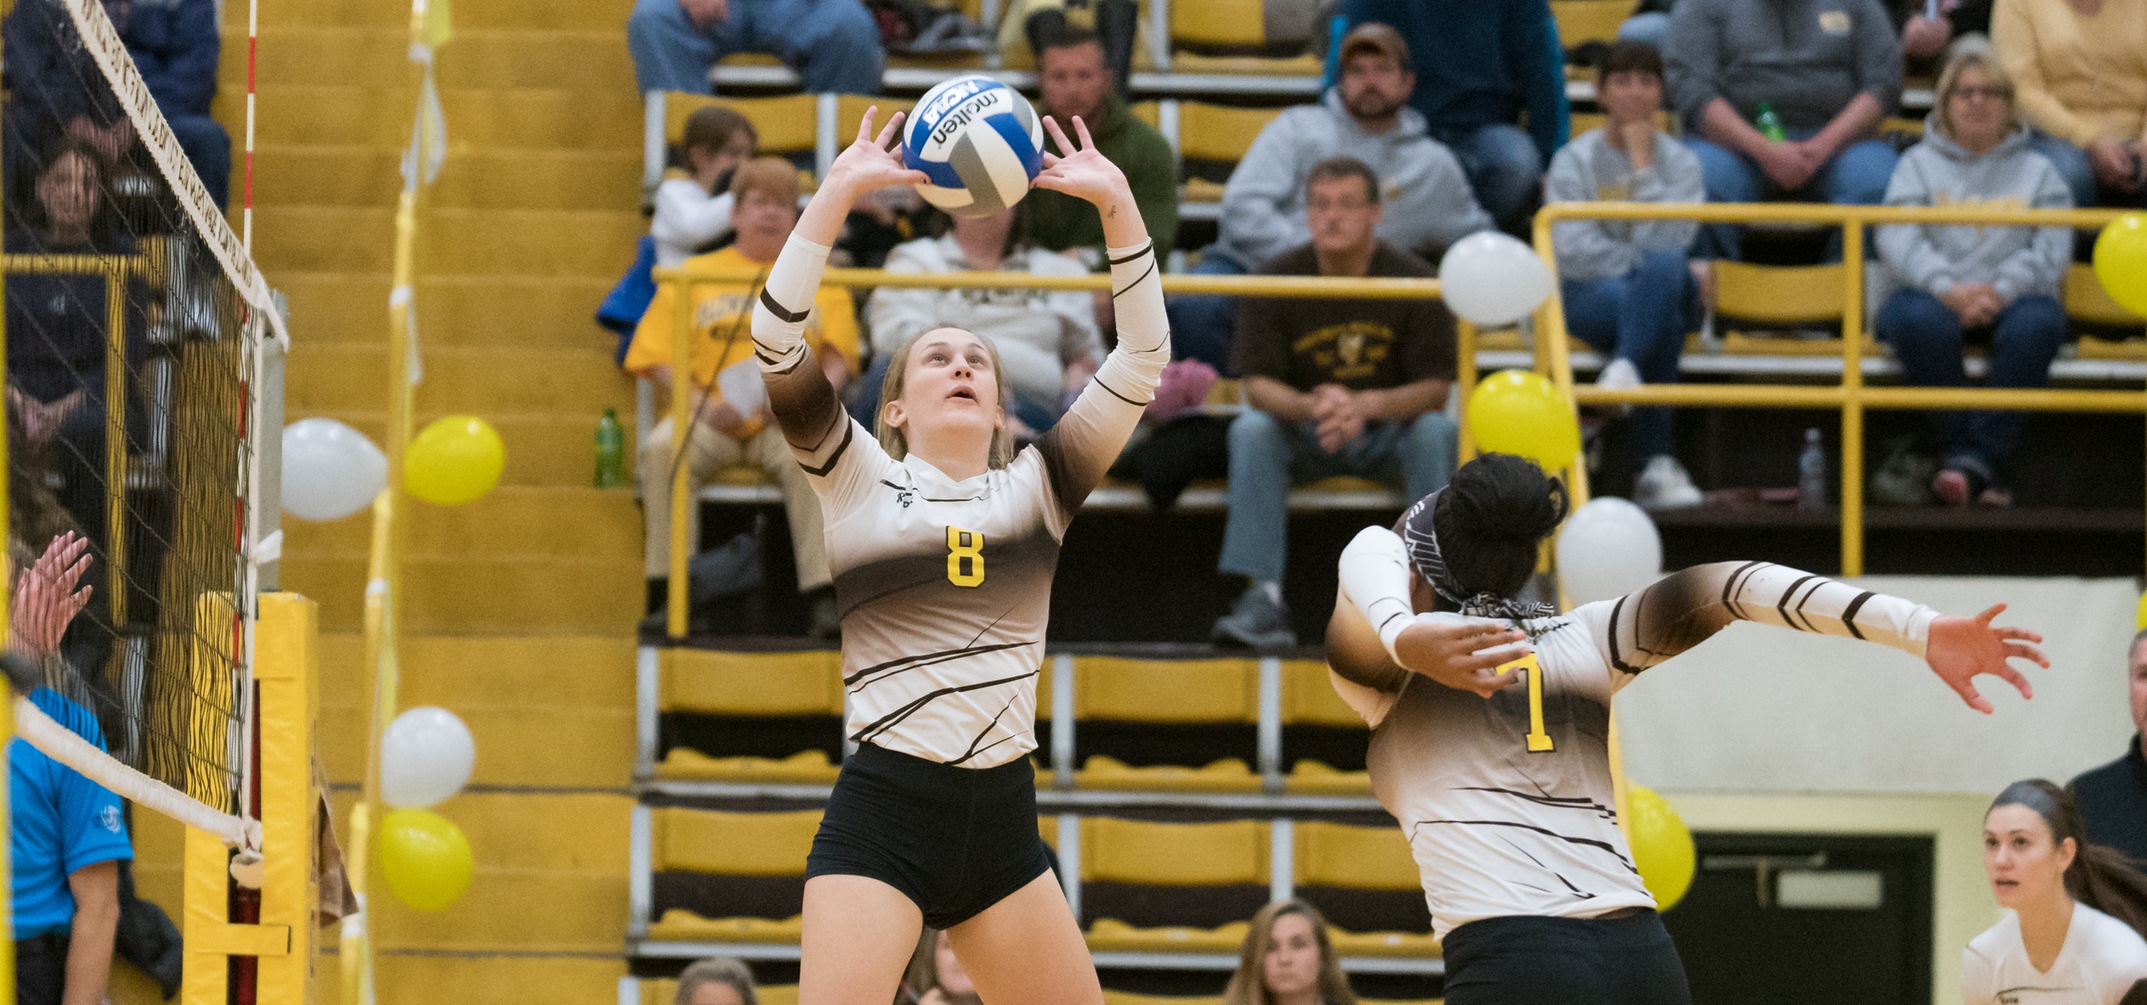 Junior setter Kathleen Egan was named to the All-Tournament team of the Blue Jay Classic